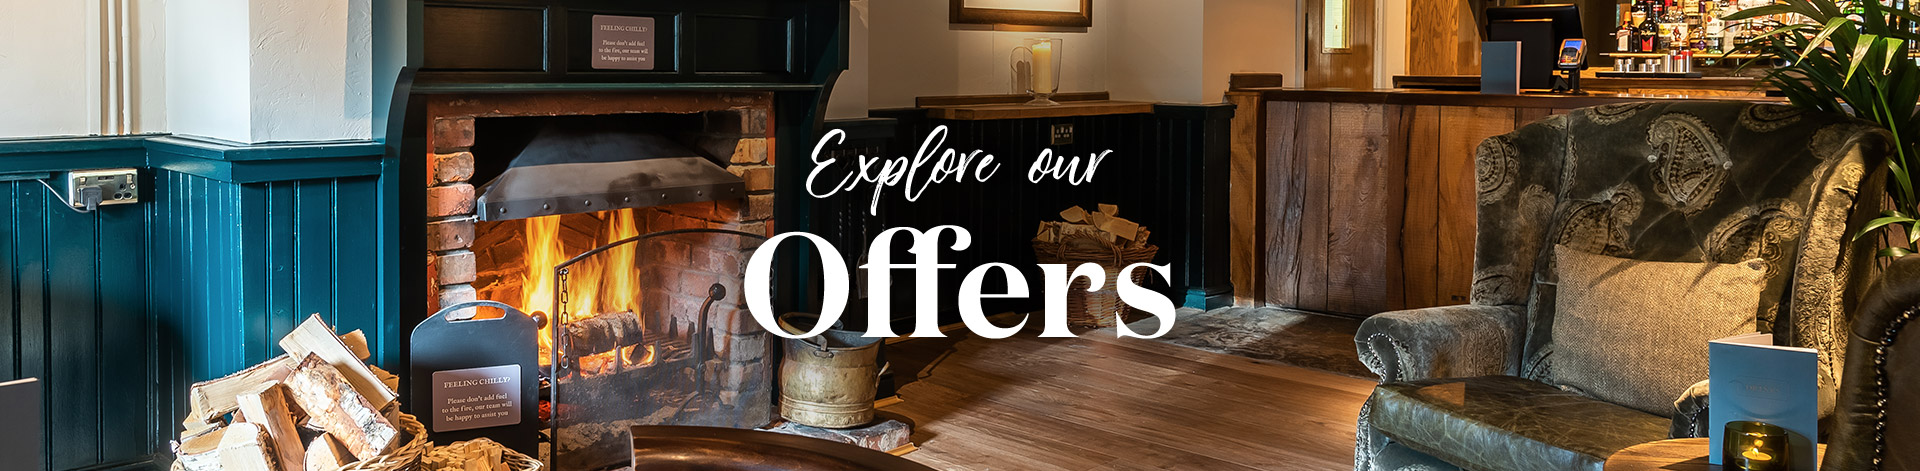 Our latest offers at The Balloch House